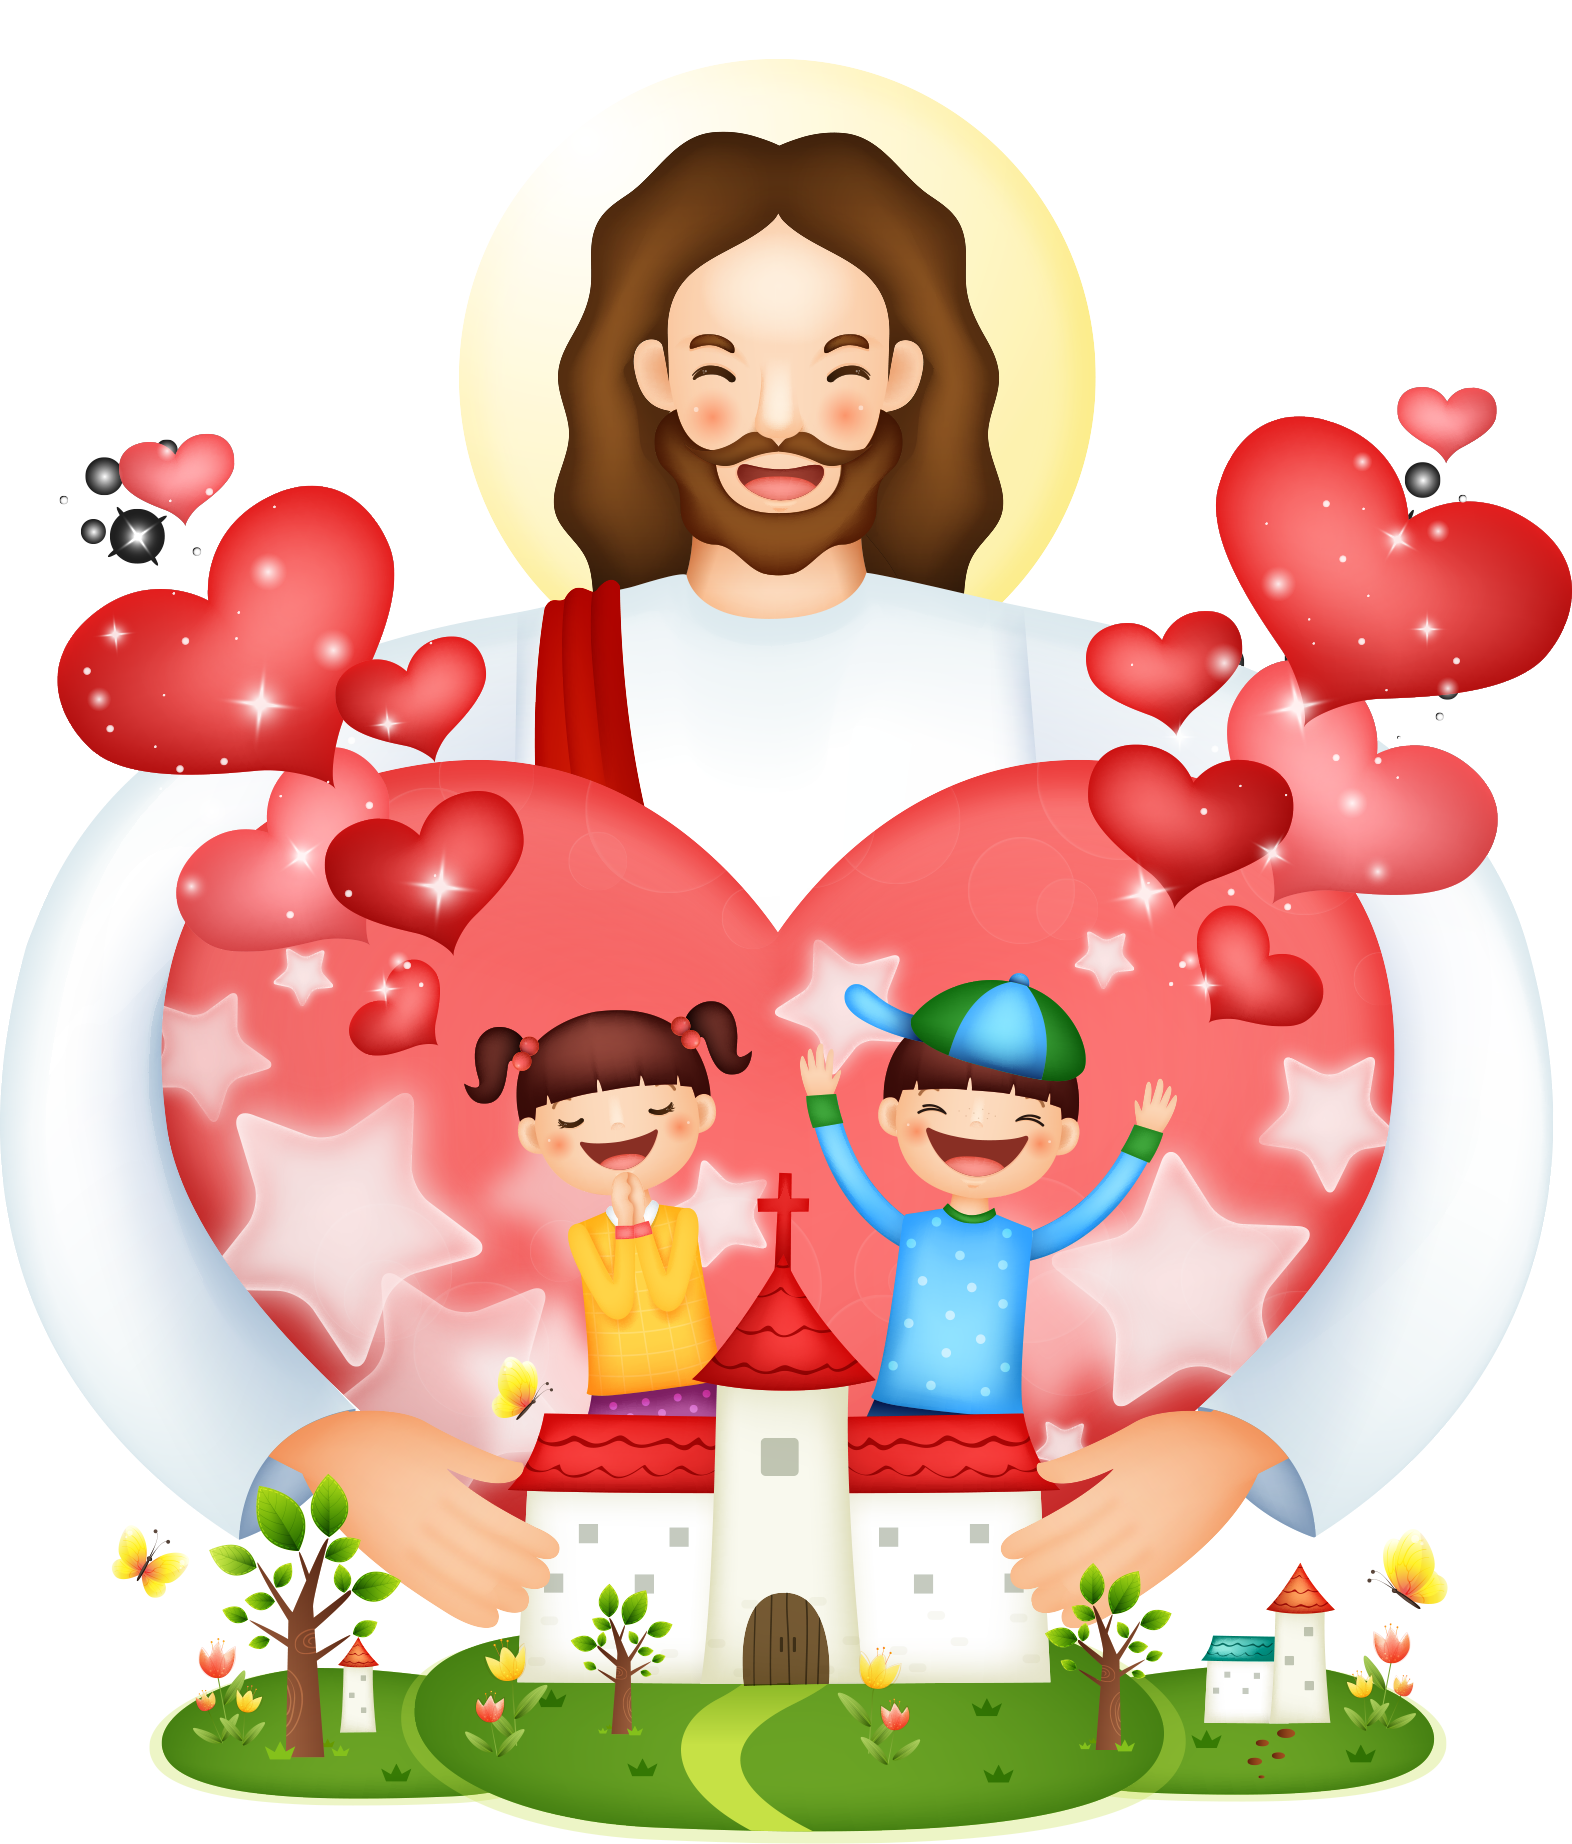 Of Illustration Jesus Protection Child Christianity PNG Image